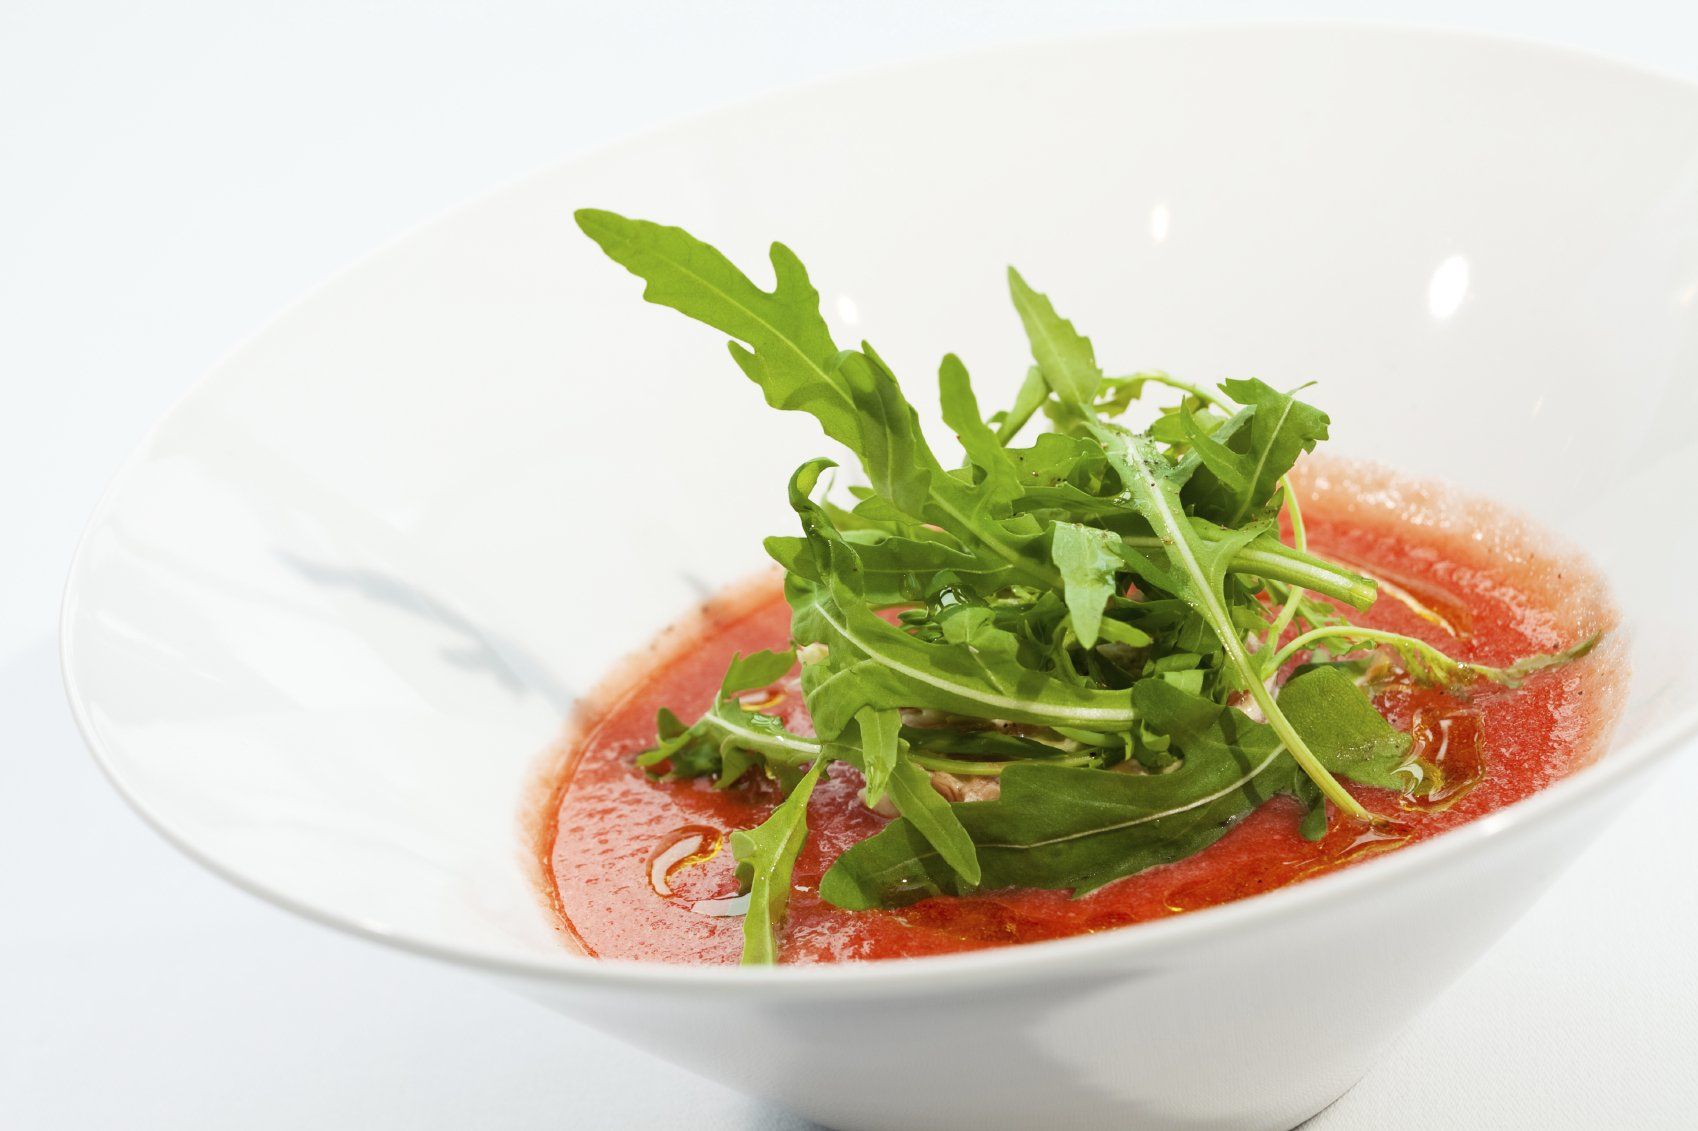 Tomato soup with fresh herbs